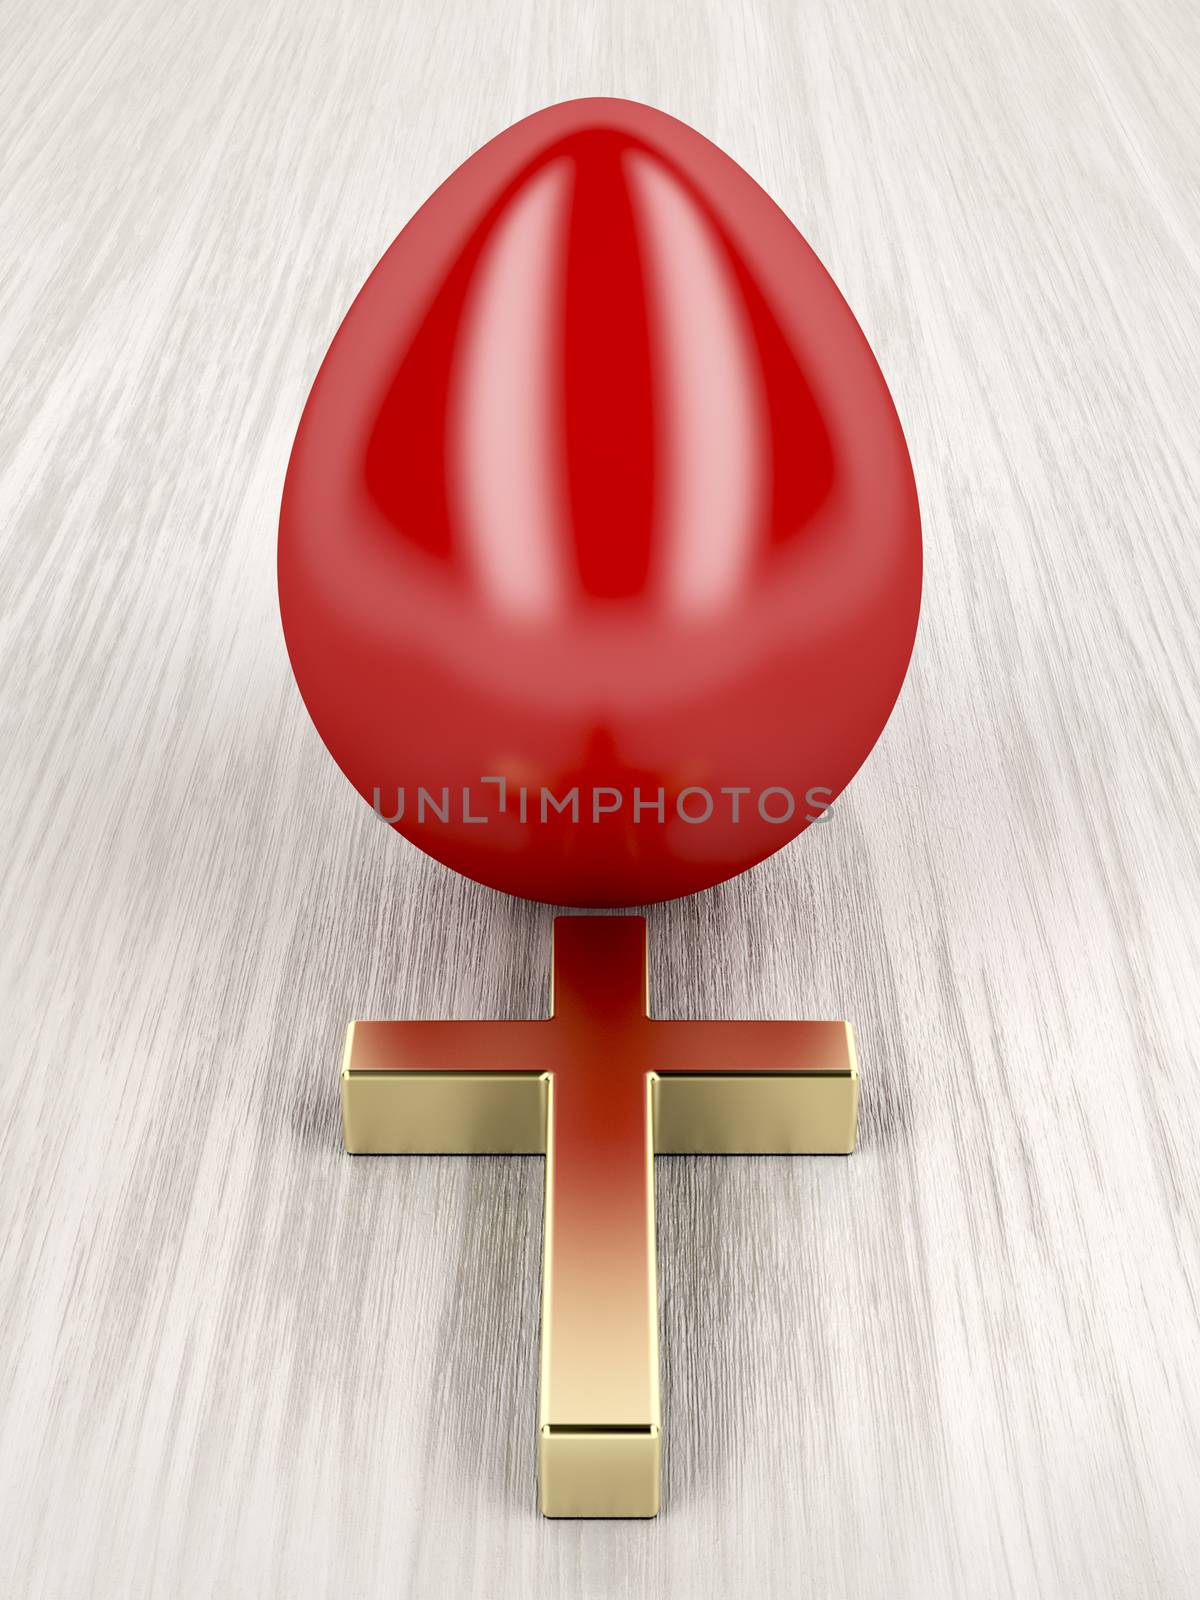 Easter decoration with red egg and golden cross